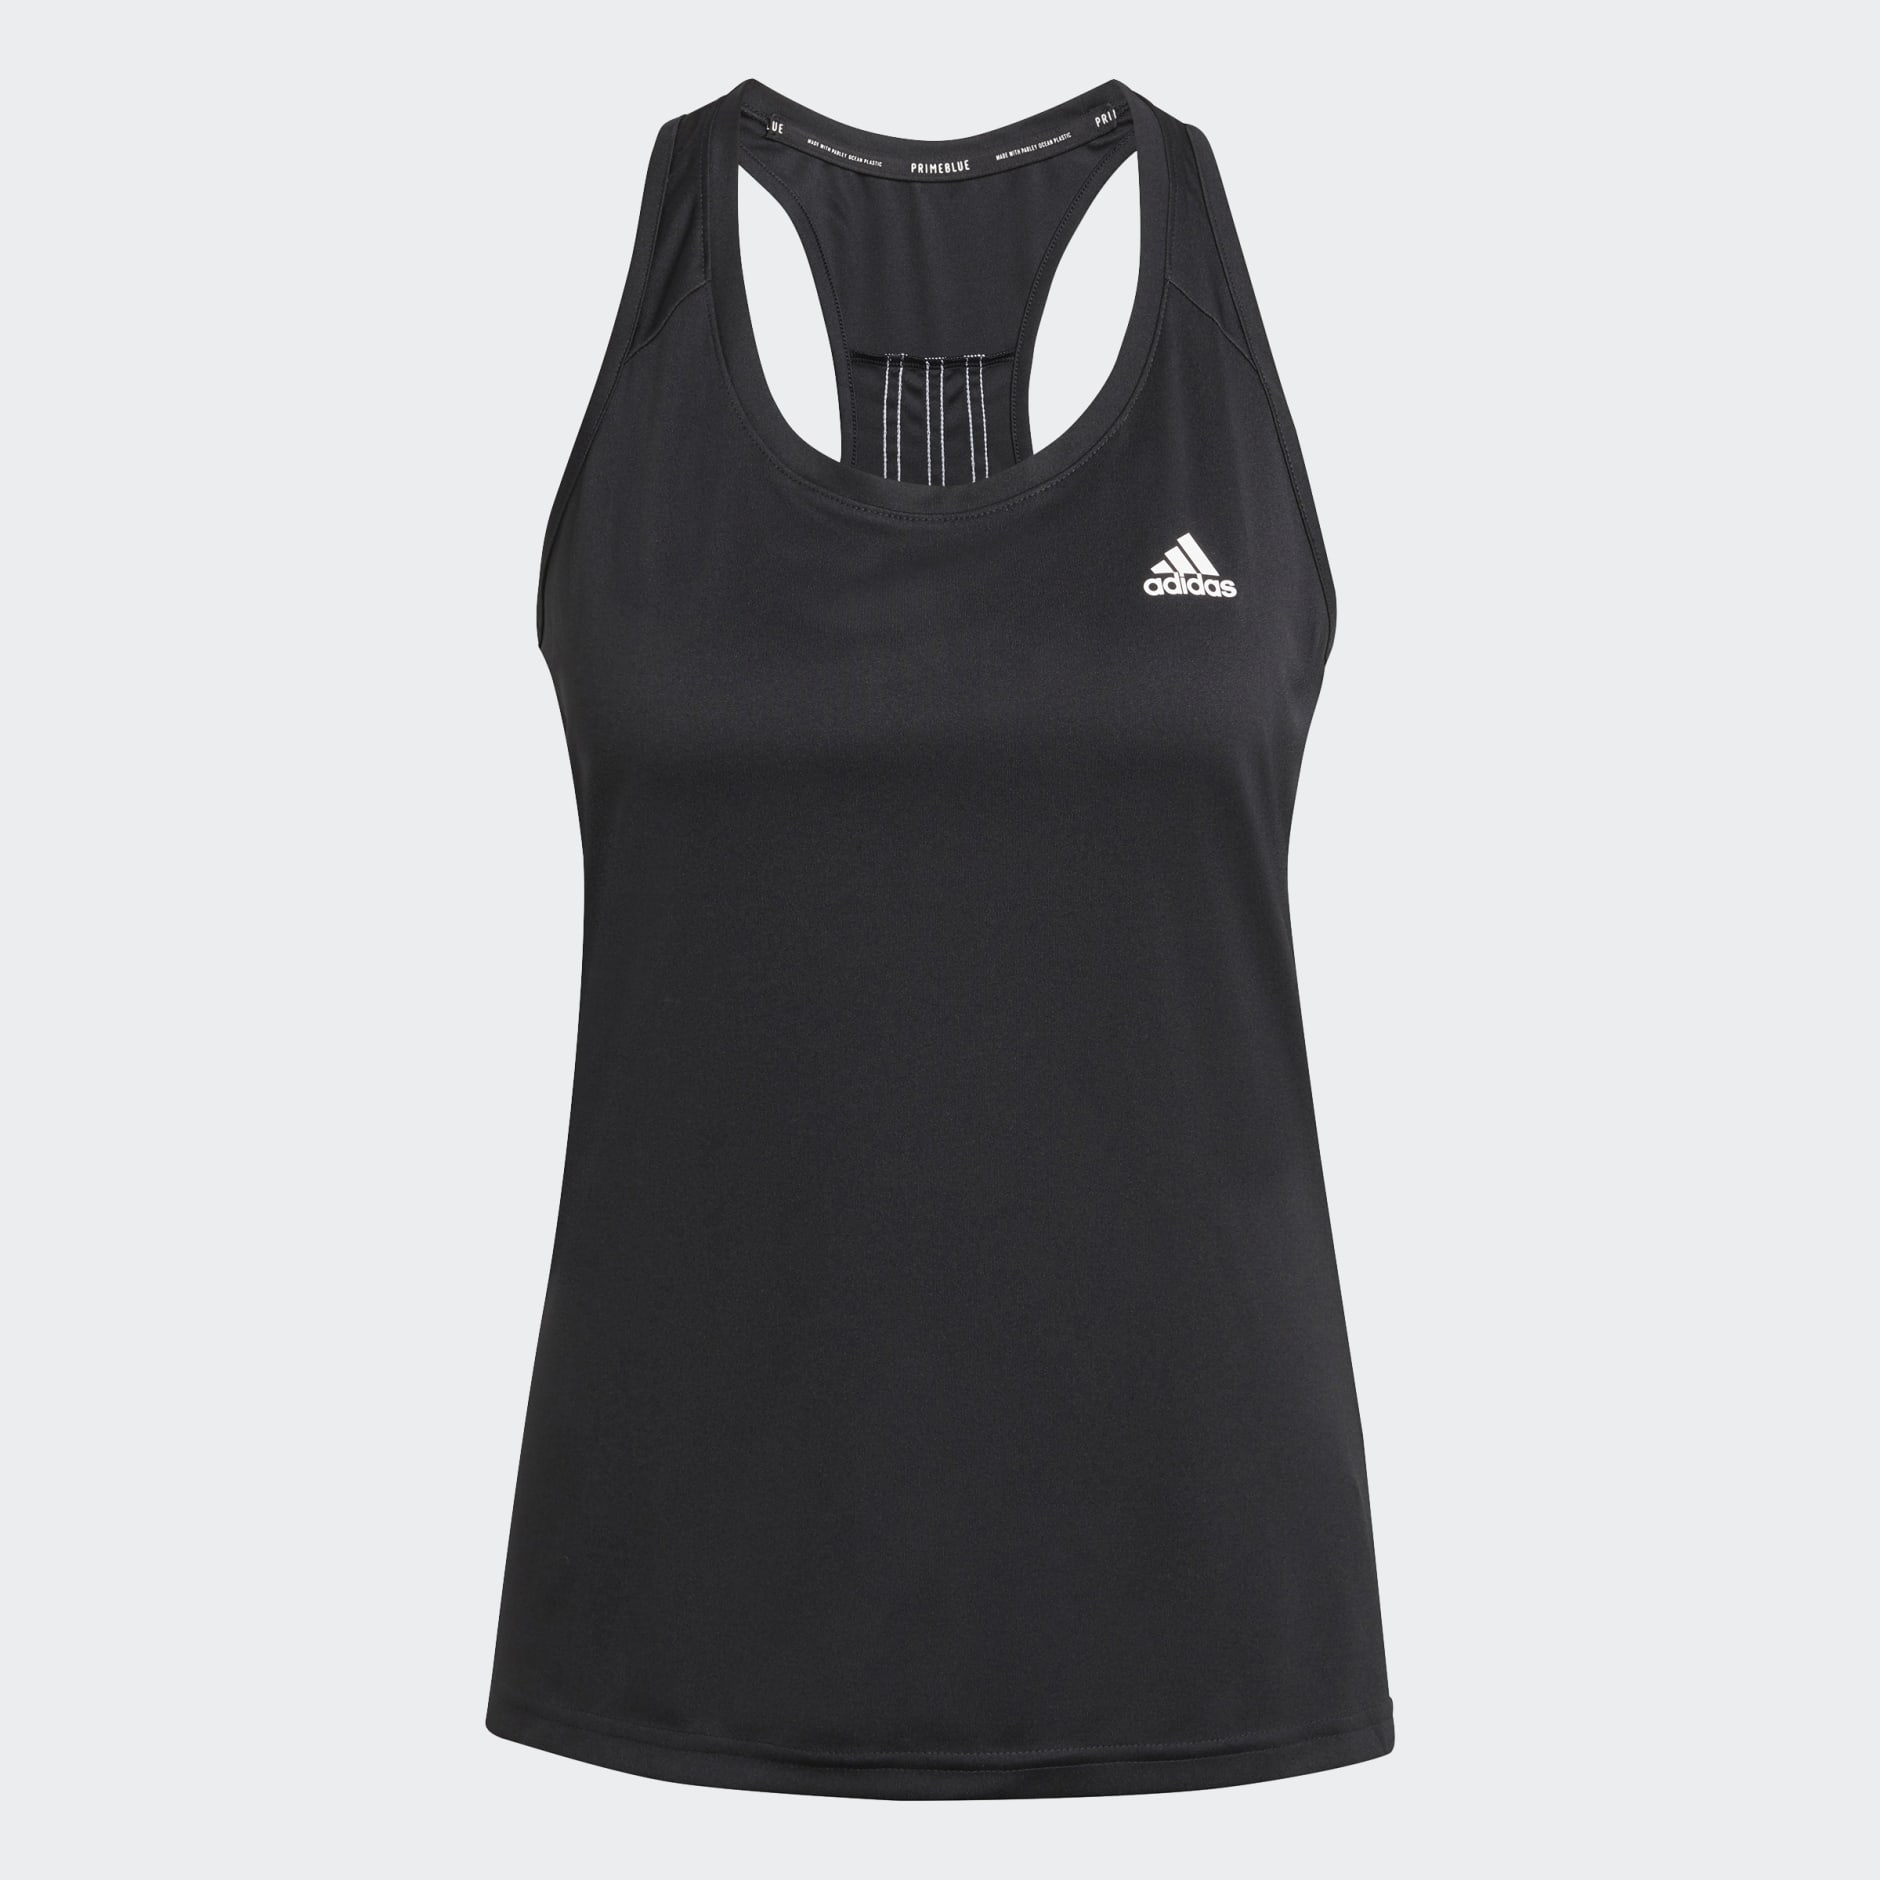 Women's Clothing - Designed to Move 3-Stripes Sport Tank Top - Black ...